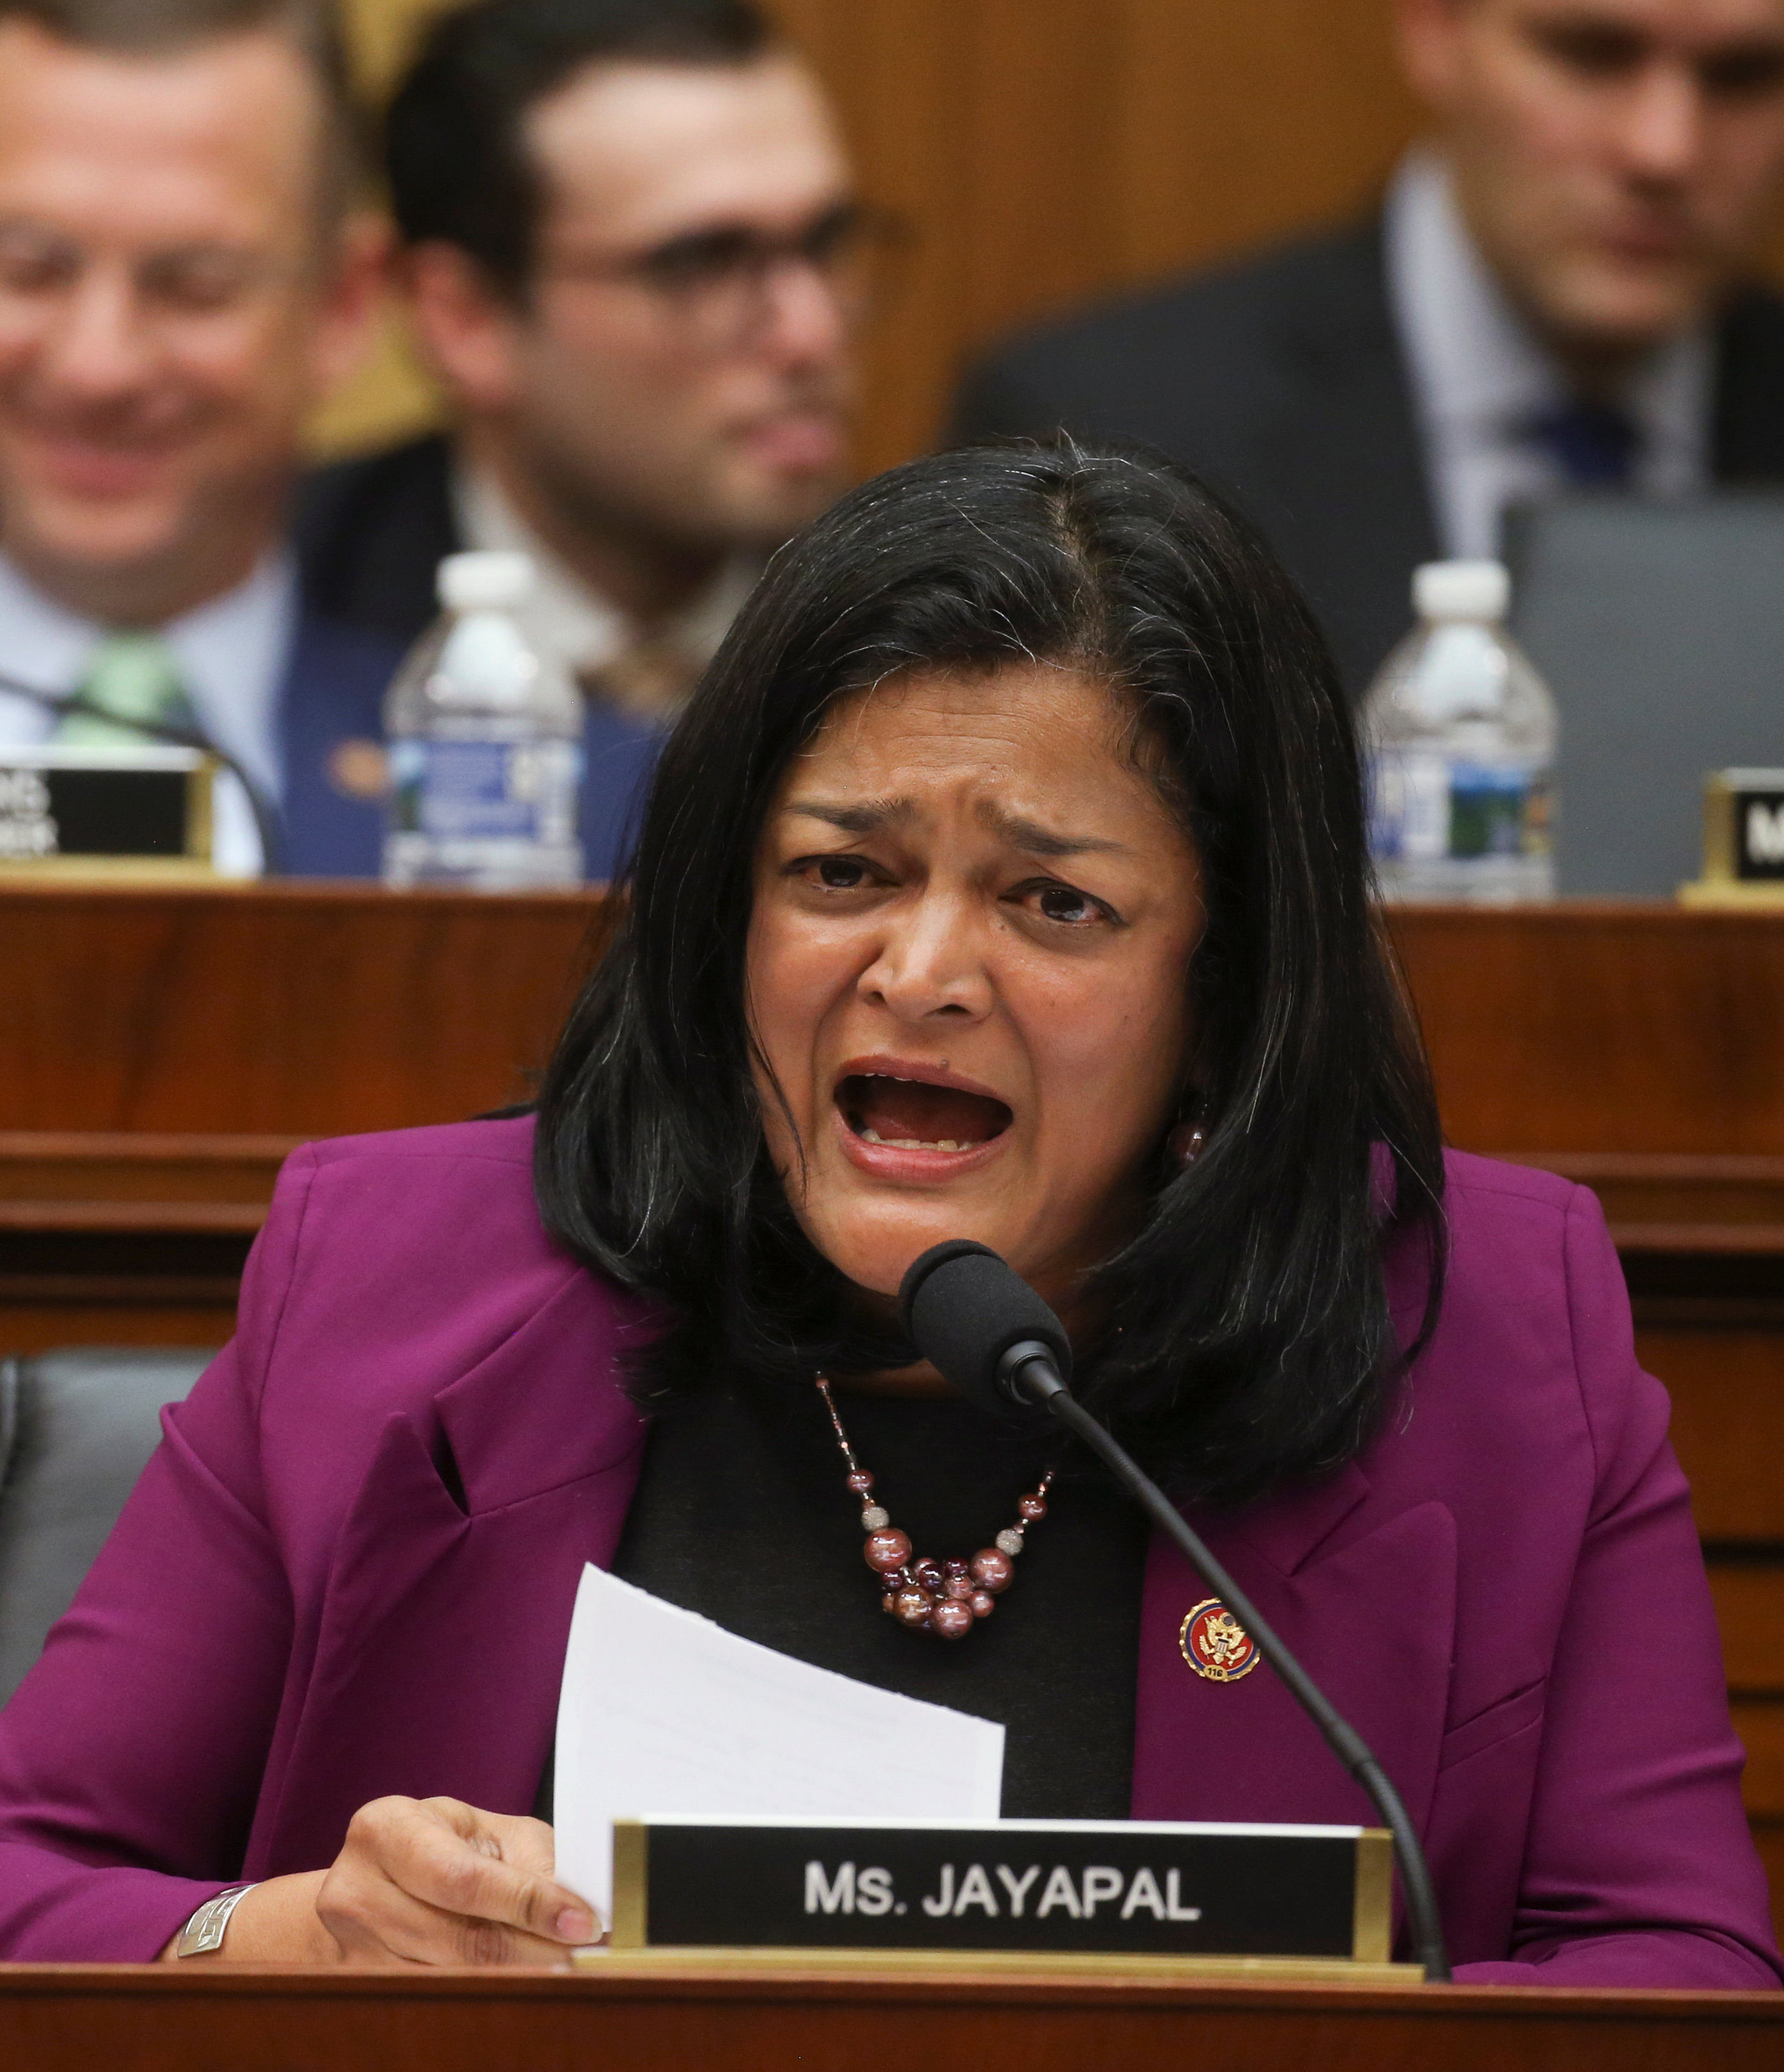 U.S. Rep. Pramila Jayapal (D-WA) speaks as the House Judiciary Committee meets to vote on whether or not to hold Attorney General Barr in contempt over his refusal to comply with a subpoena seeking an unredacted version of the Mueller report on Capitol Hill in Washington, U.S. (Reuters Photo)